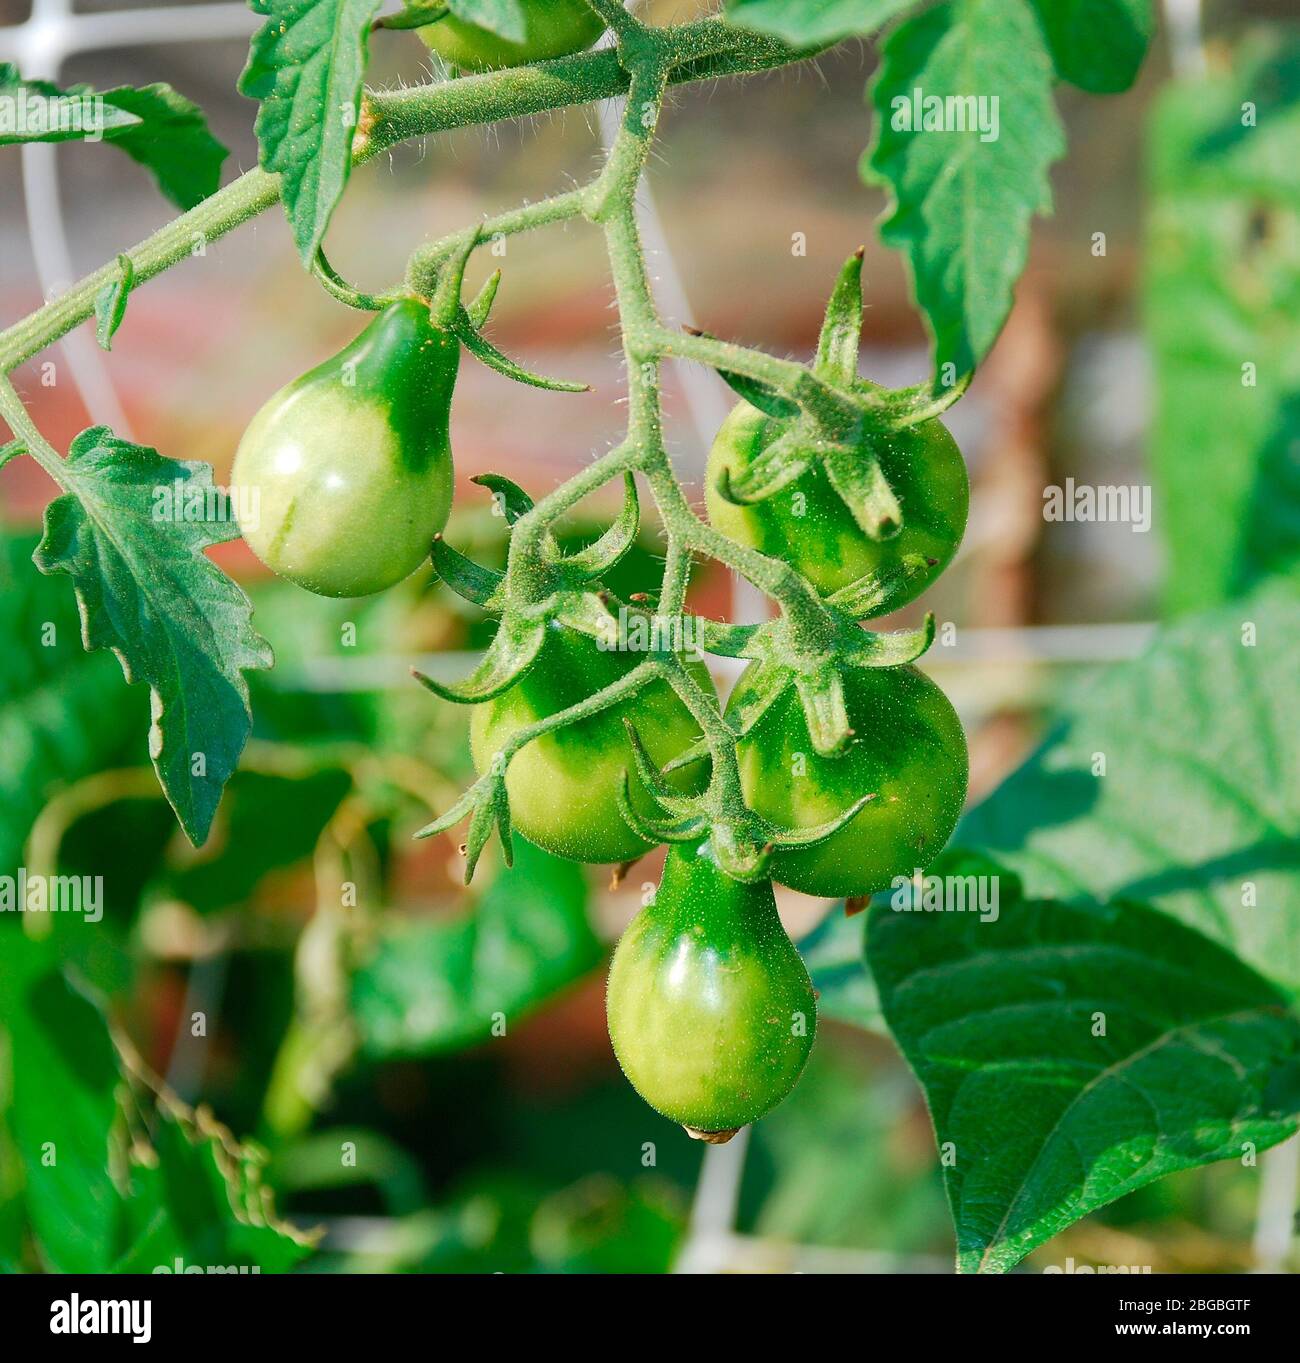 Unripe yellow pear tomatoes, sometimes known as Beam's Yellow Pear, growing on a vine in late summer Stock Photo